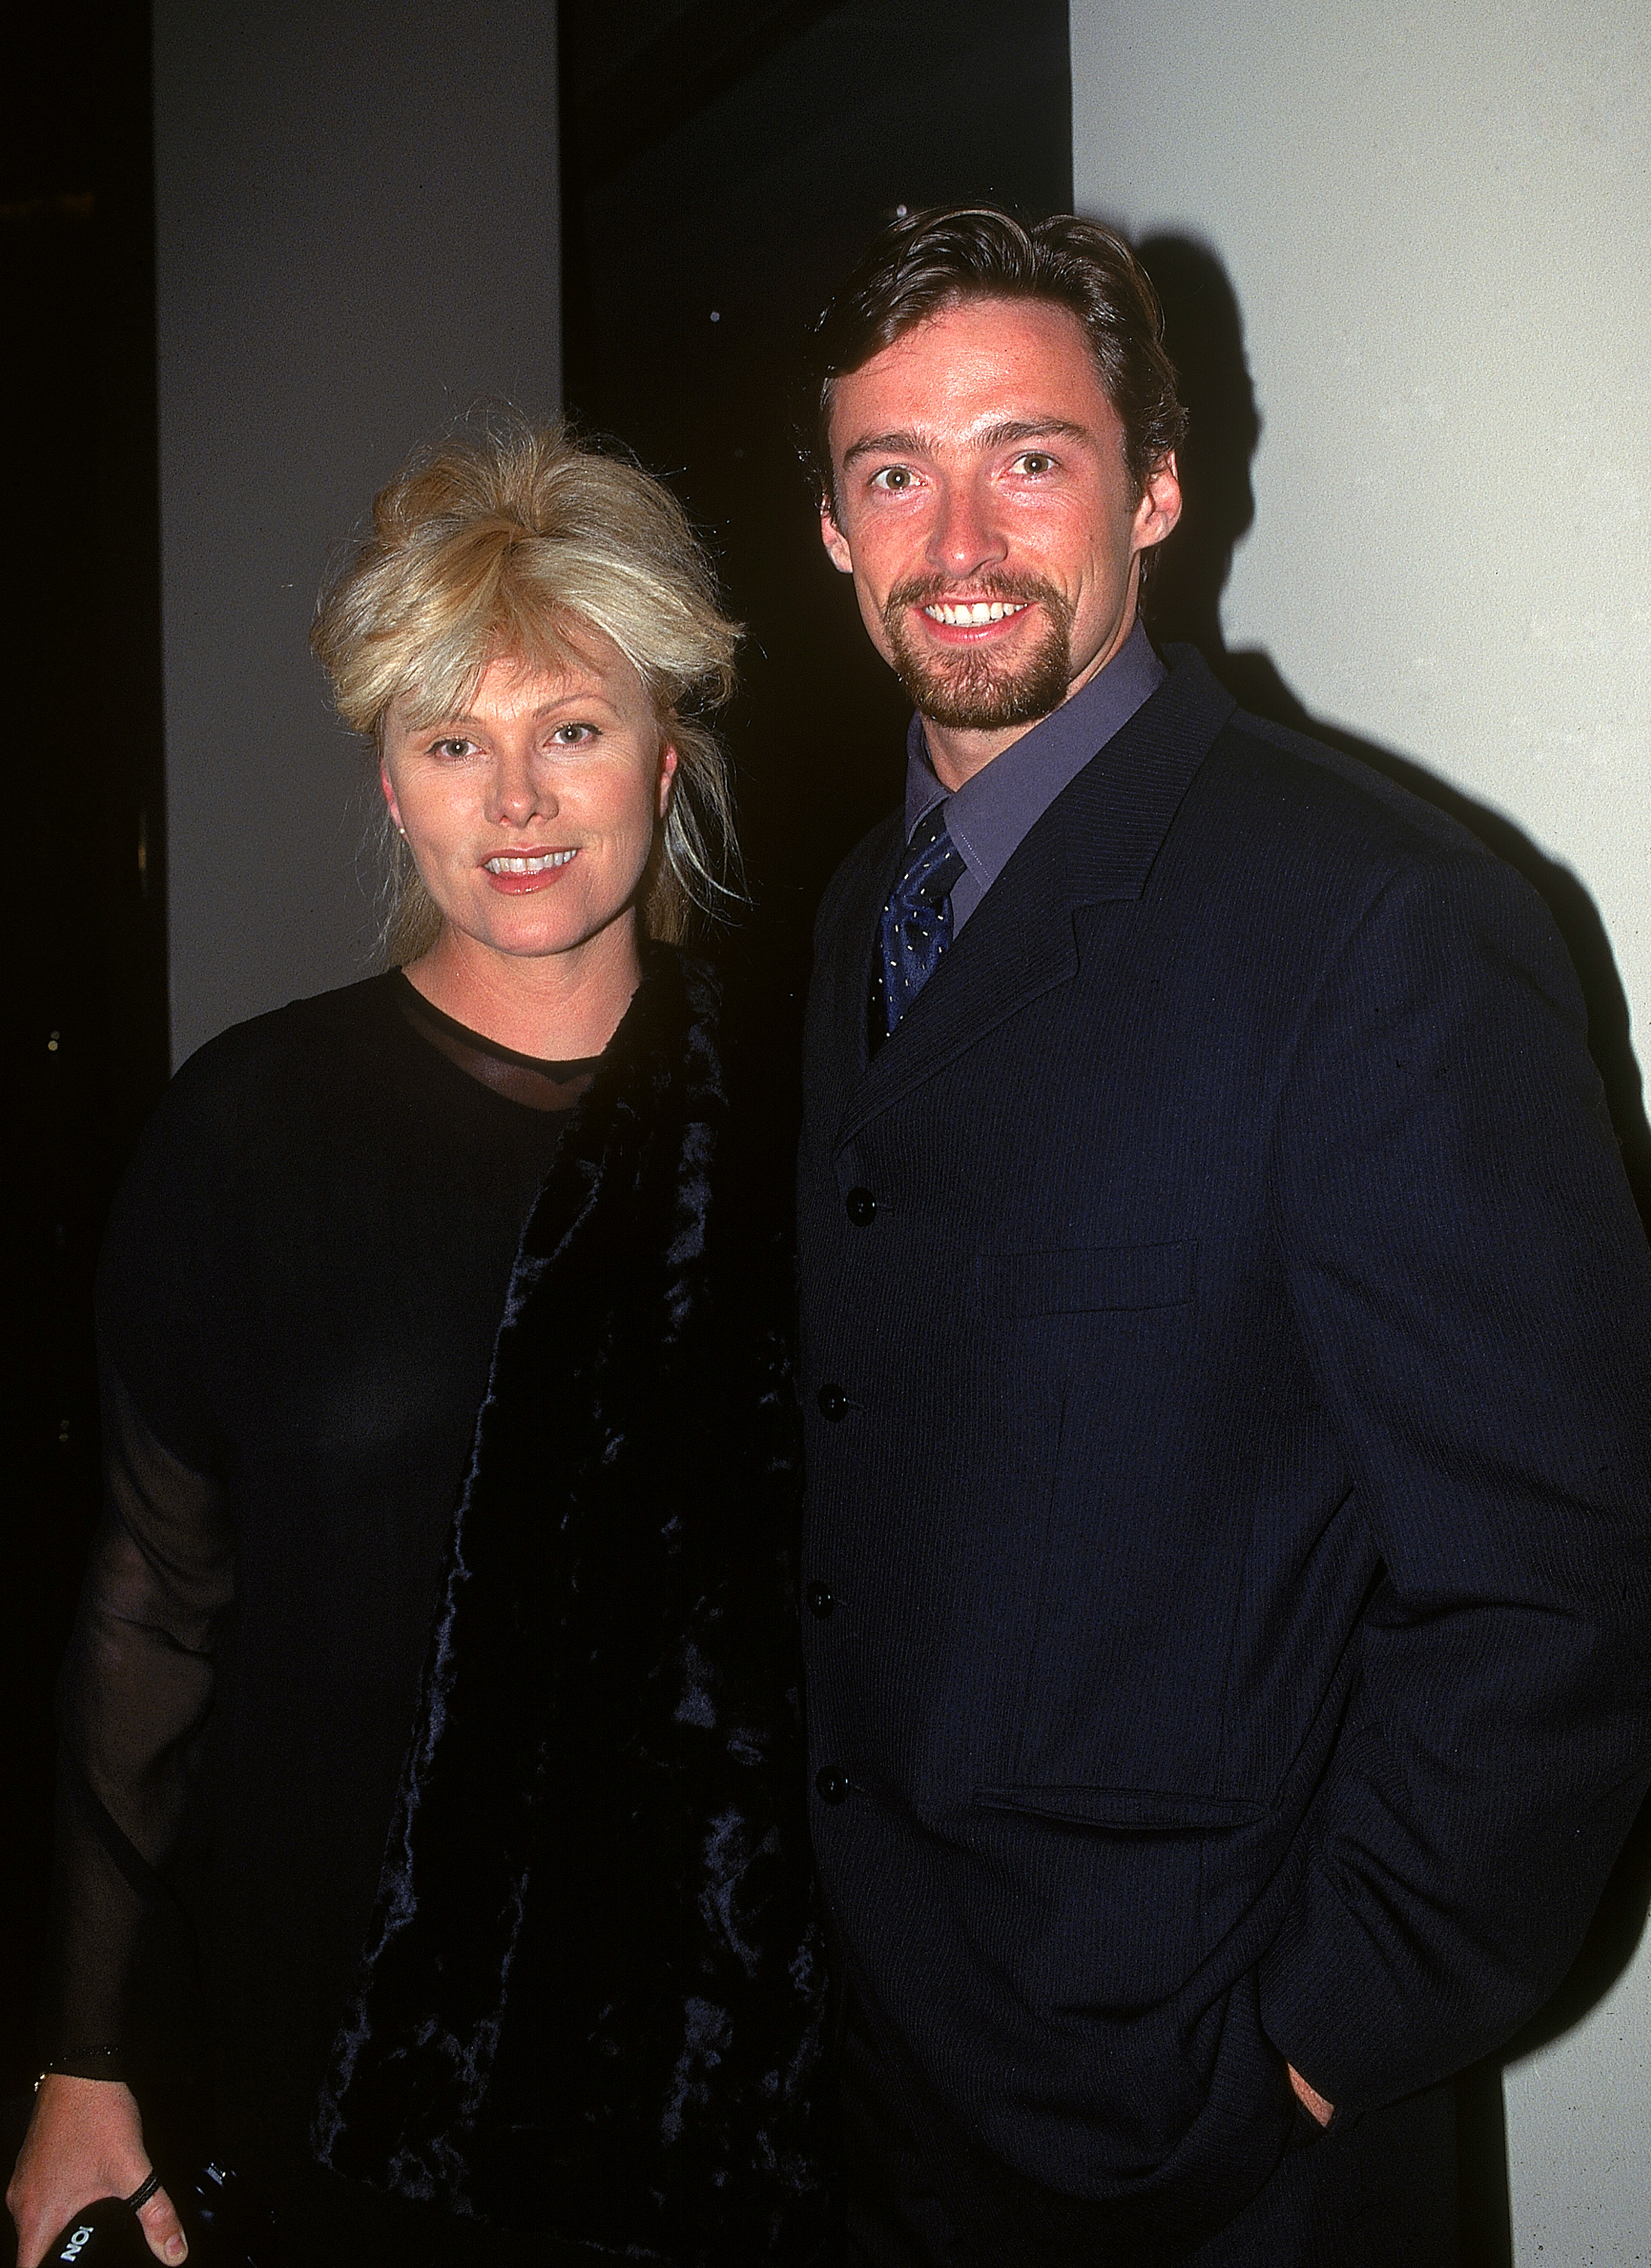 Deborra-Lee Furness and Hugh Jackman at the Variety Club Heart Awards on July 18, 1997, in Sydney, Australia | Source: Getty Images